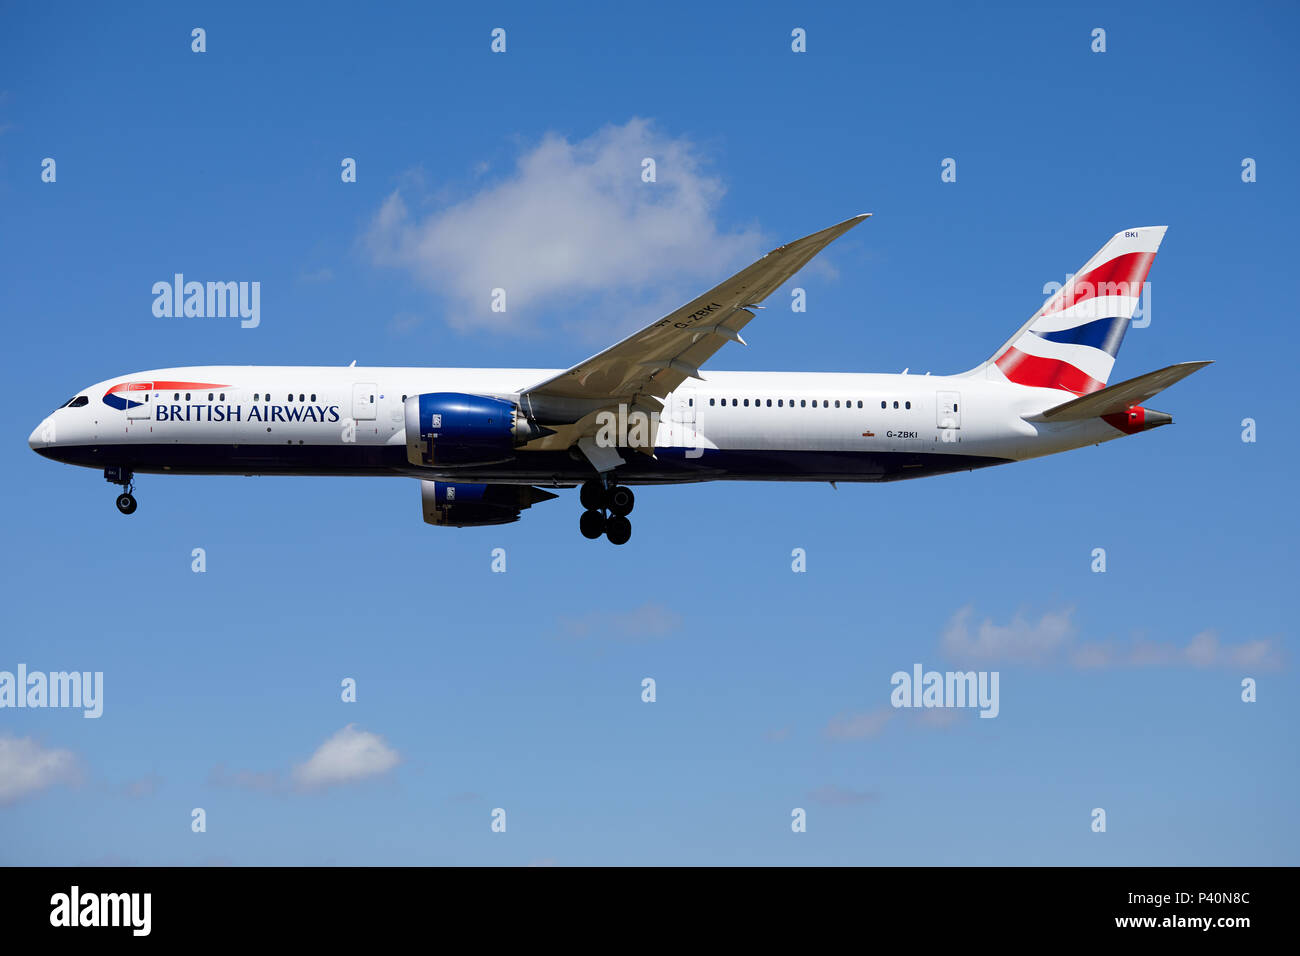 A British Airways Boeing 787-9 Dreamliner aircraft, registration number G-ZBKI, approaching a landing. Stock Photo